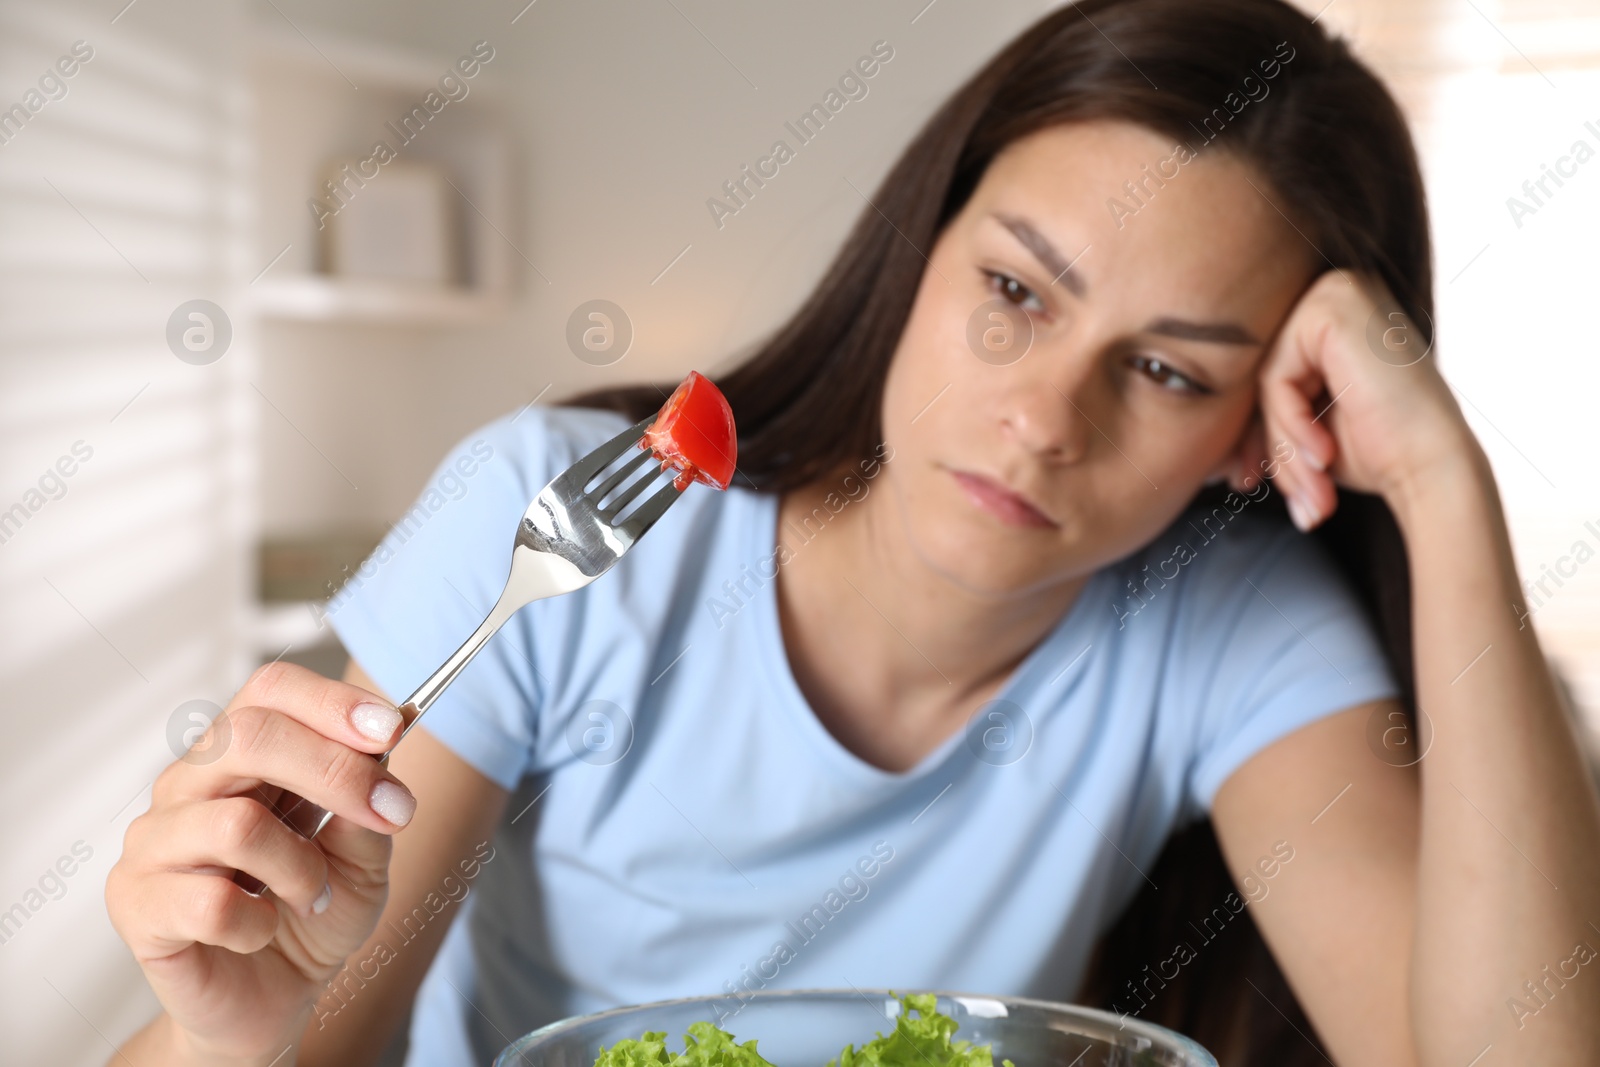 Photo of Eating disorder. Sad woman holding fork with tomato indoors